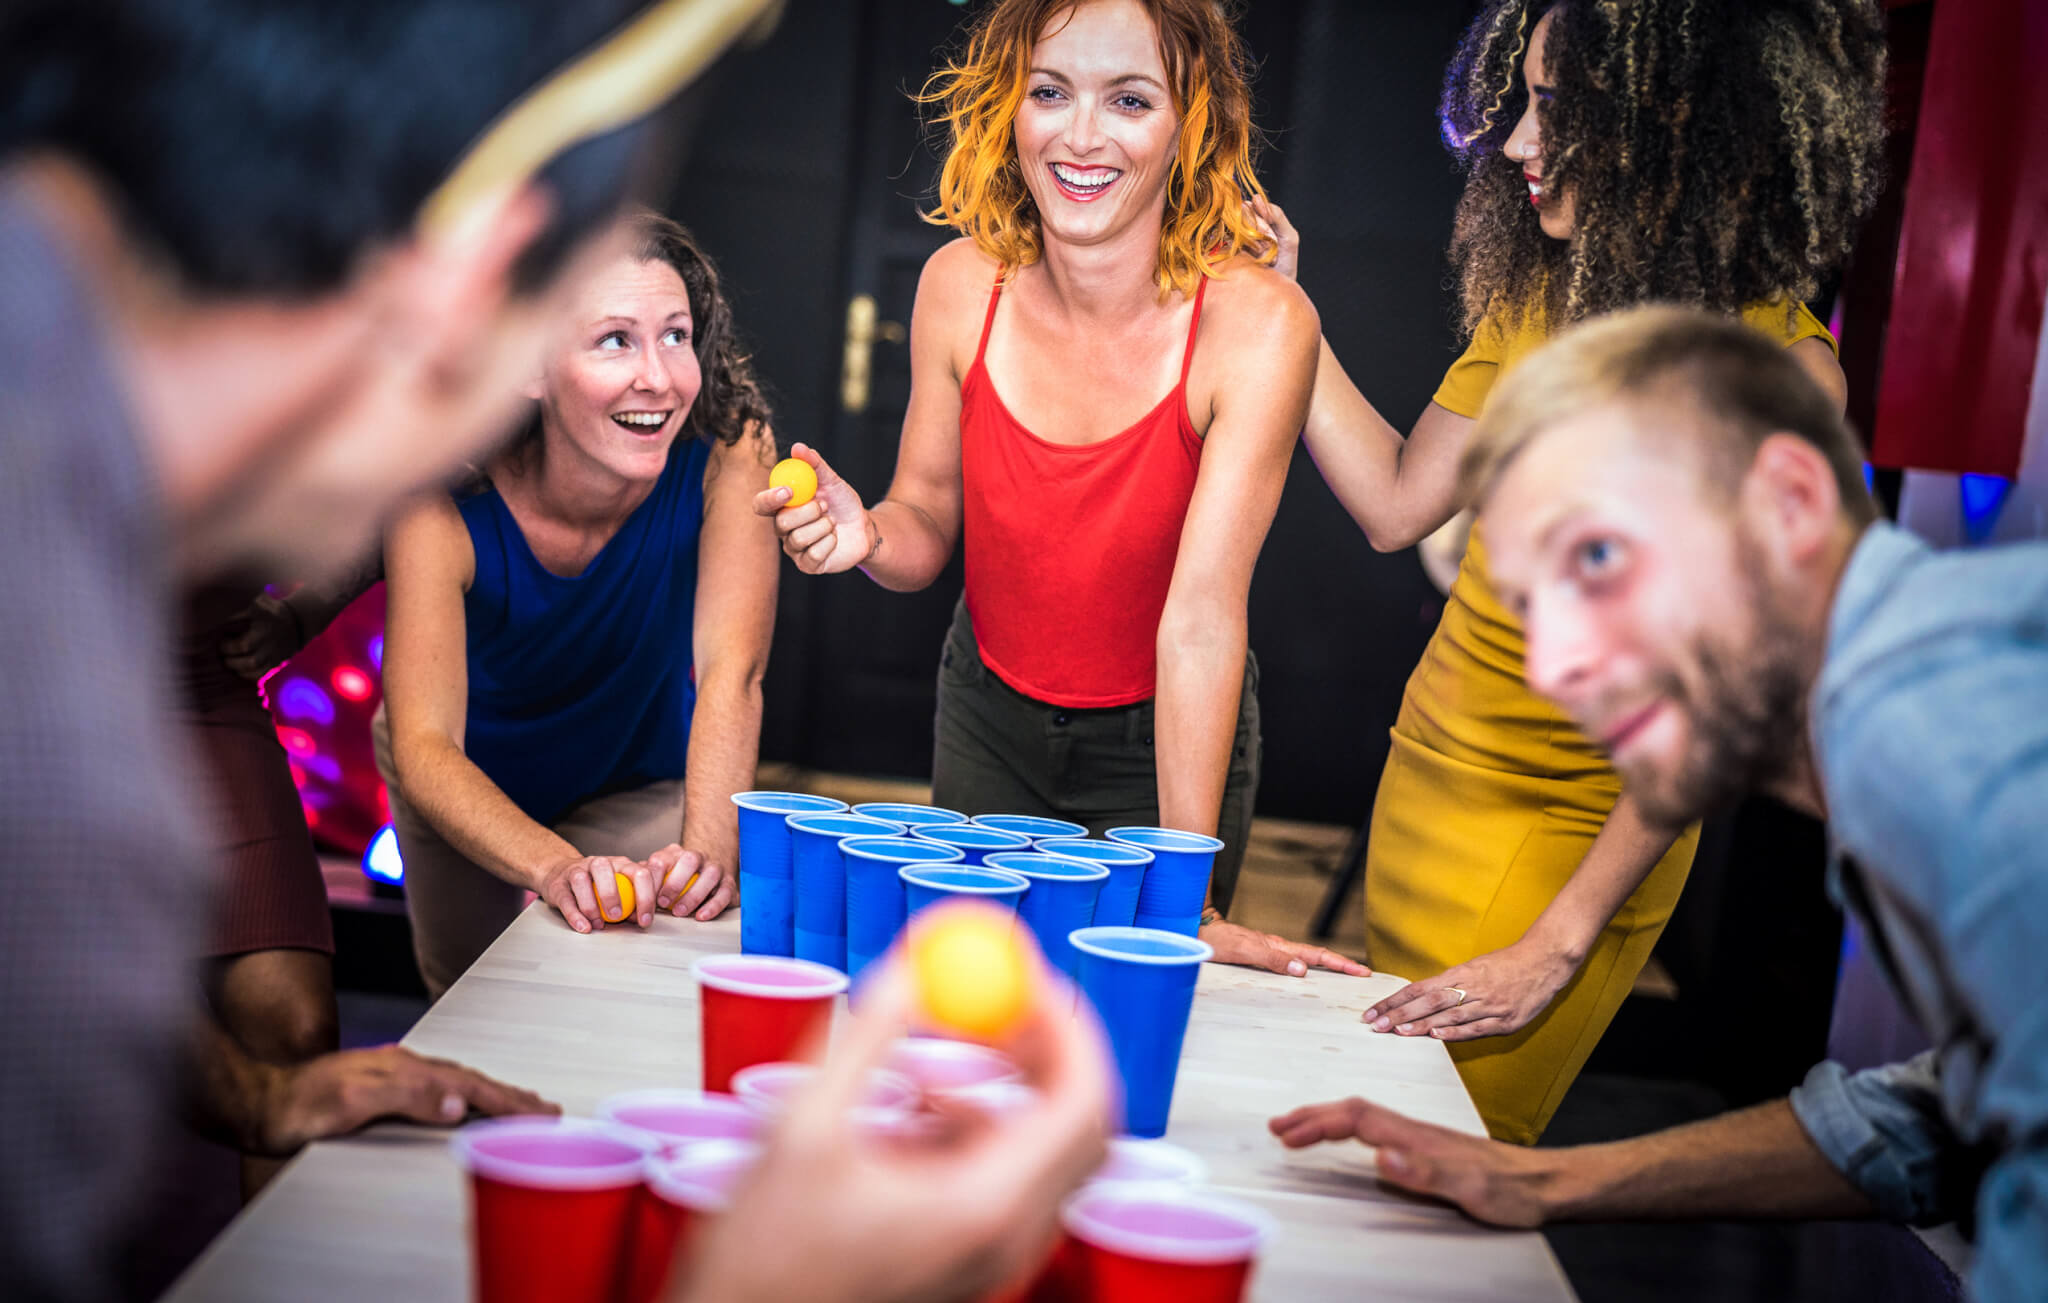 https://www.daysoftheyear.com/wp-content/uploads/young-friends-playing-beer-pong-at-youth-hostel-2022-12-09-04-46-11-utc.jpg